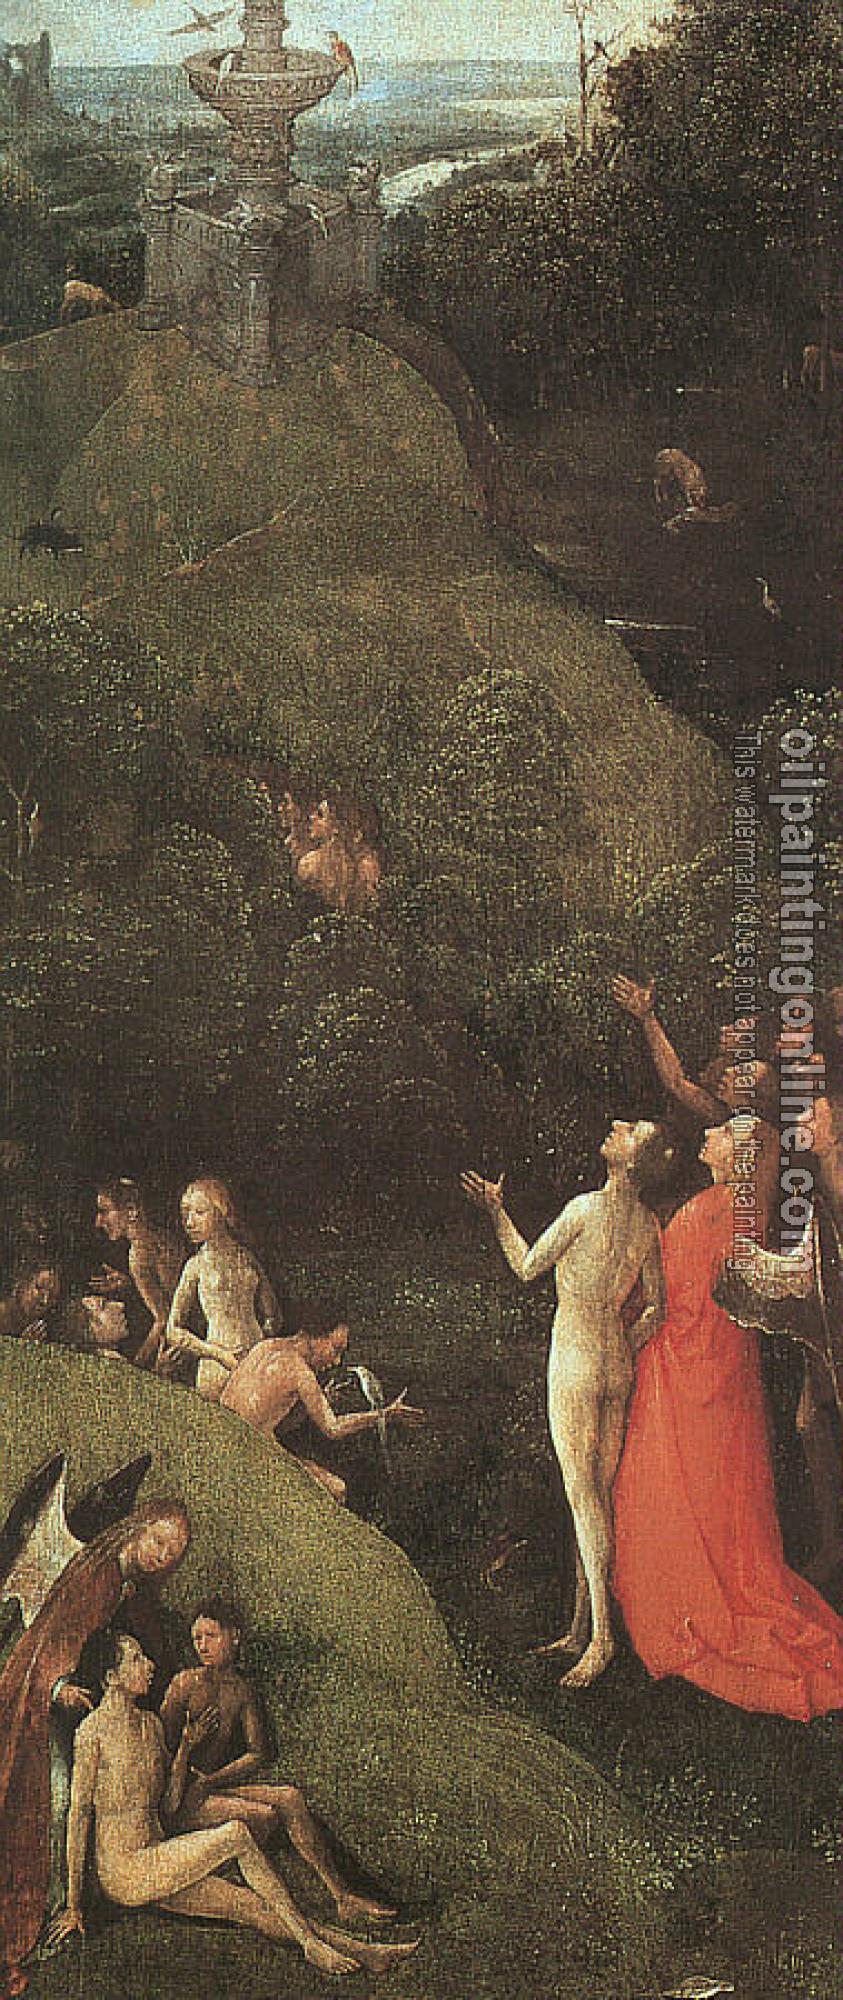 Bosch, Hieronymus - Terrestrial Paradise, from the Paradise and Hell panels normally attributed to Bosch